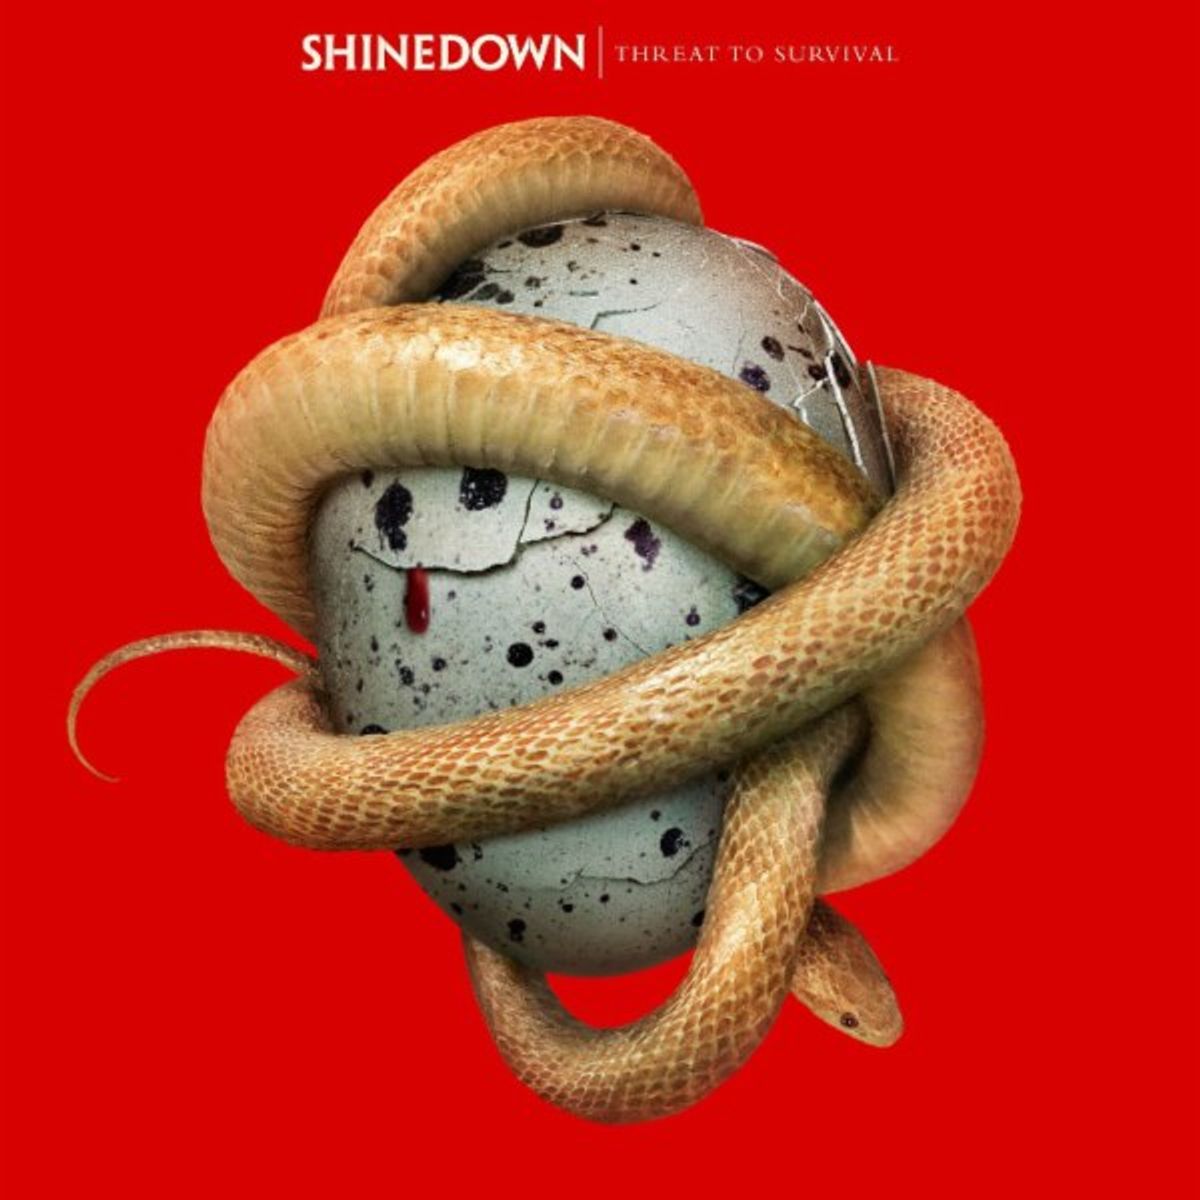 Why You Need To Listen To Shinedown Now